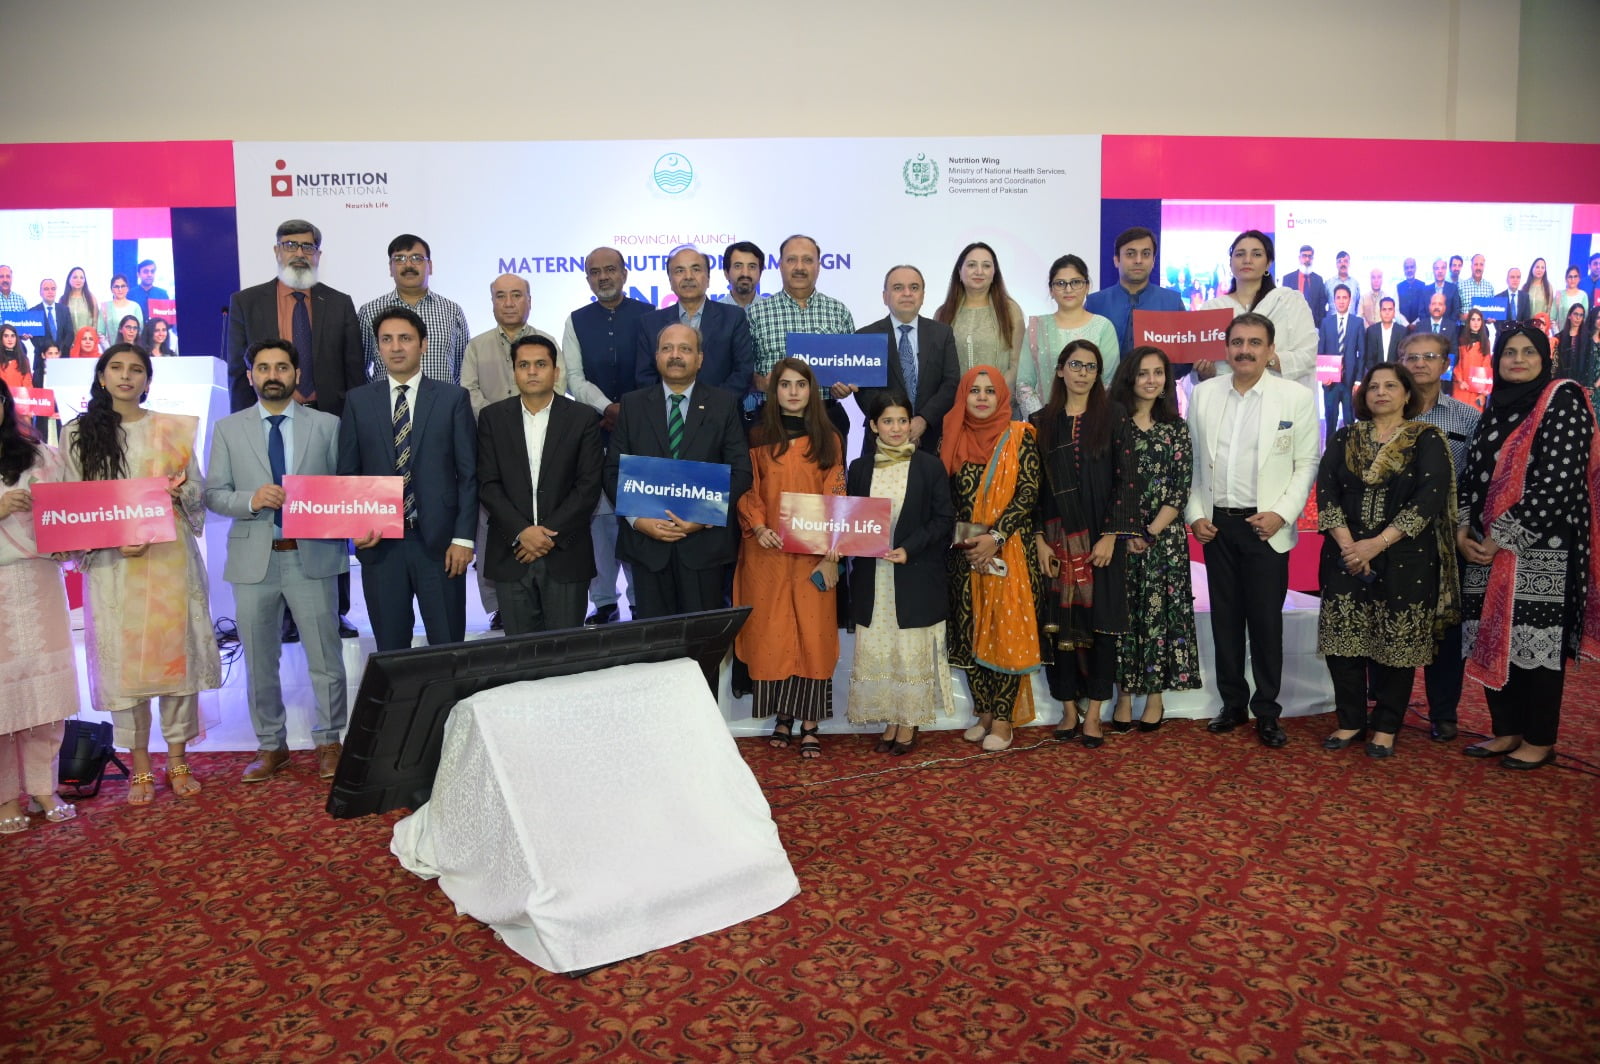 The NourishMaa campaign launch witnessed the presence of over 100 attendees